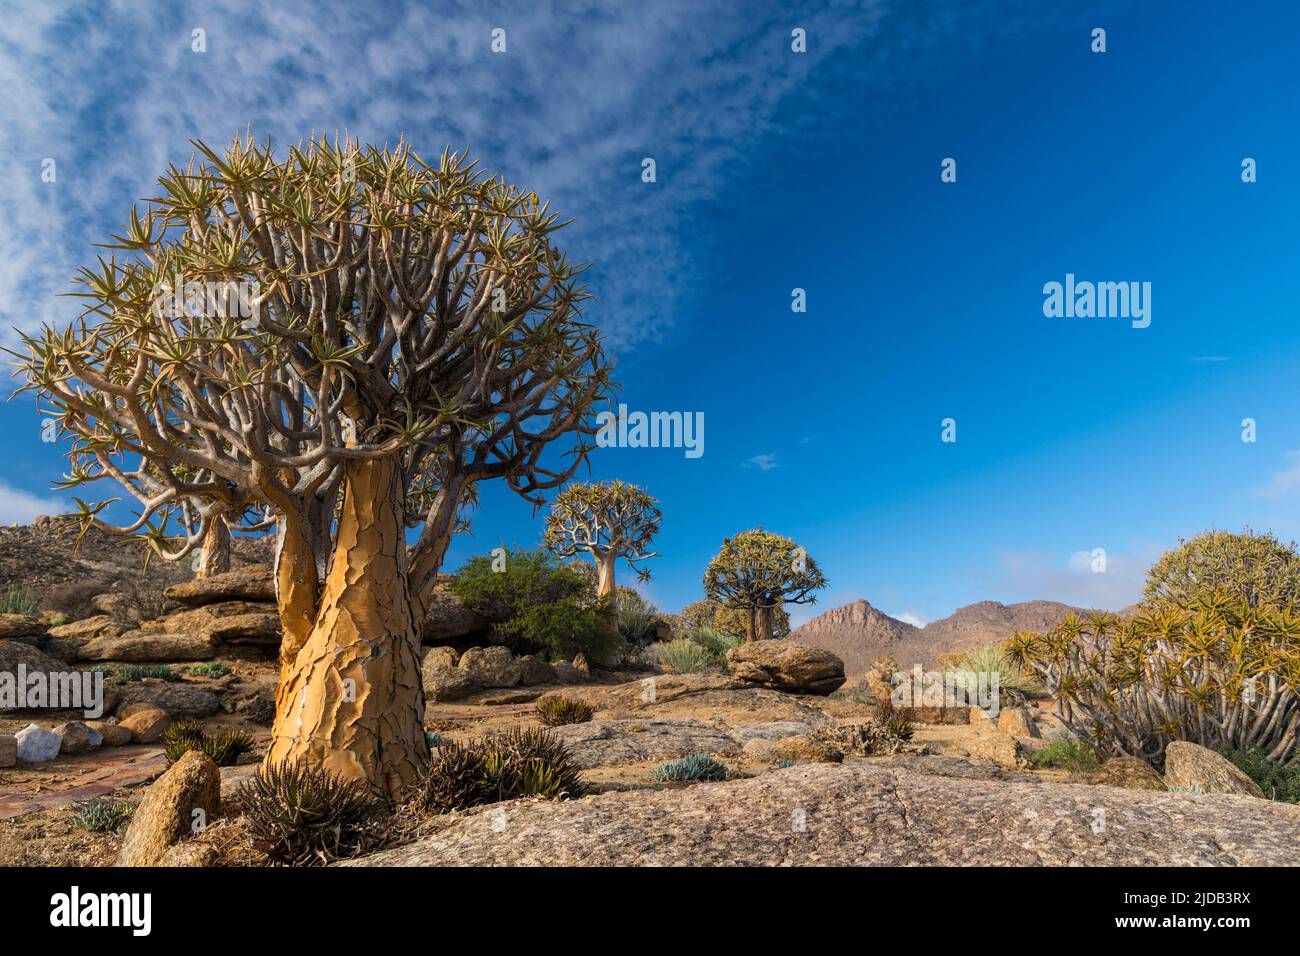 Quiver trees (Aloidendron dichotomum) in Geogap Nature Reserve near Springbok in Namaqualand; Northern Cape, South Africa Stock Photo